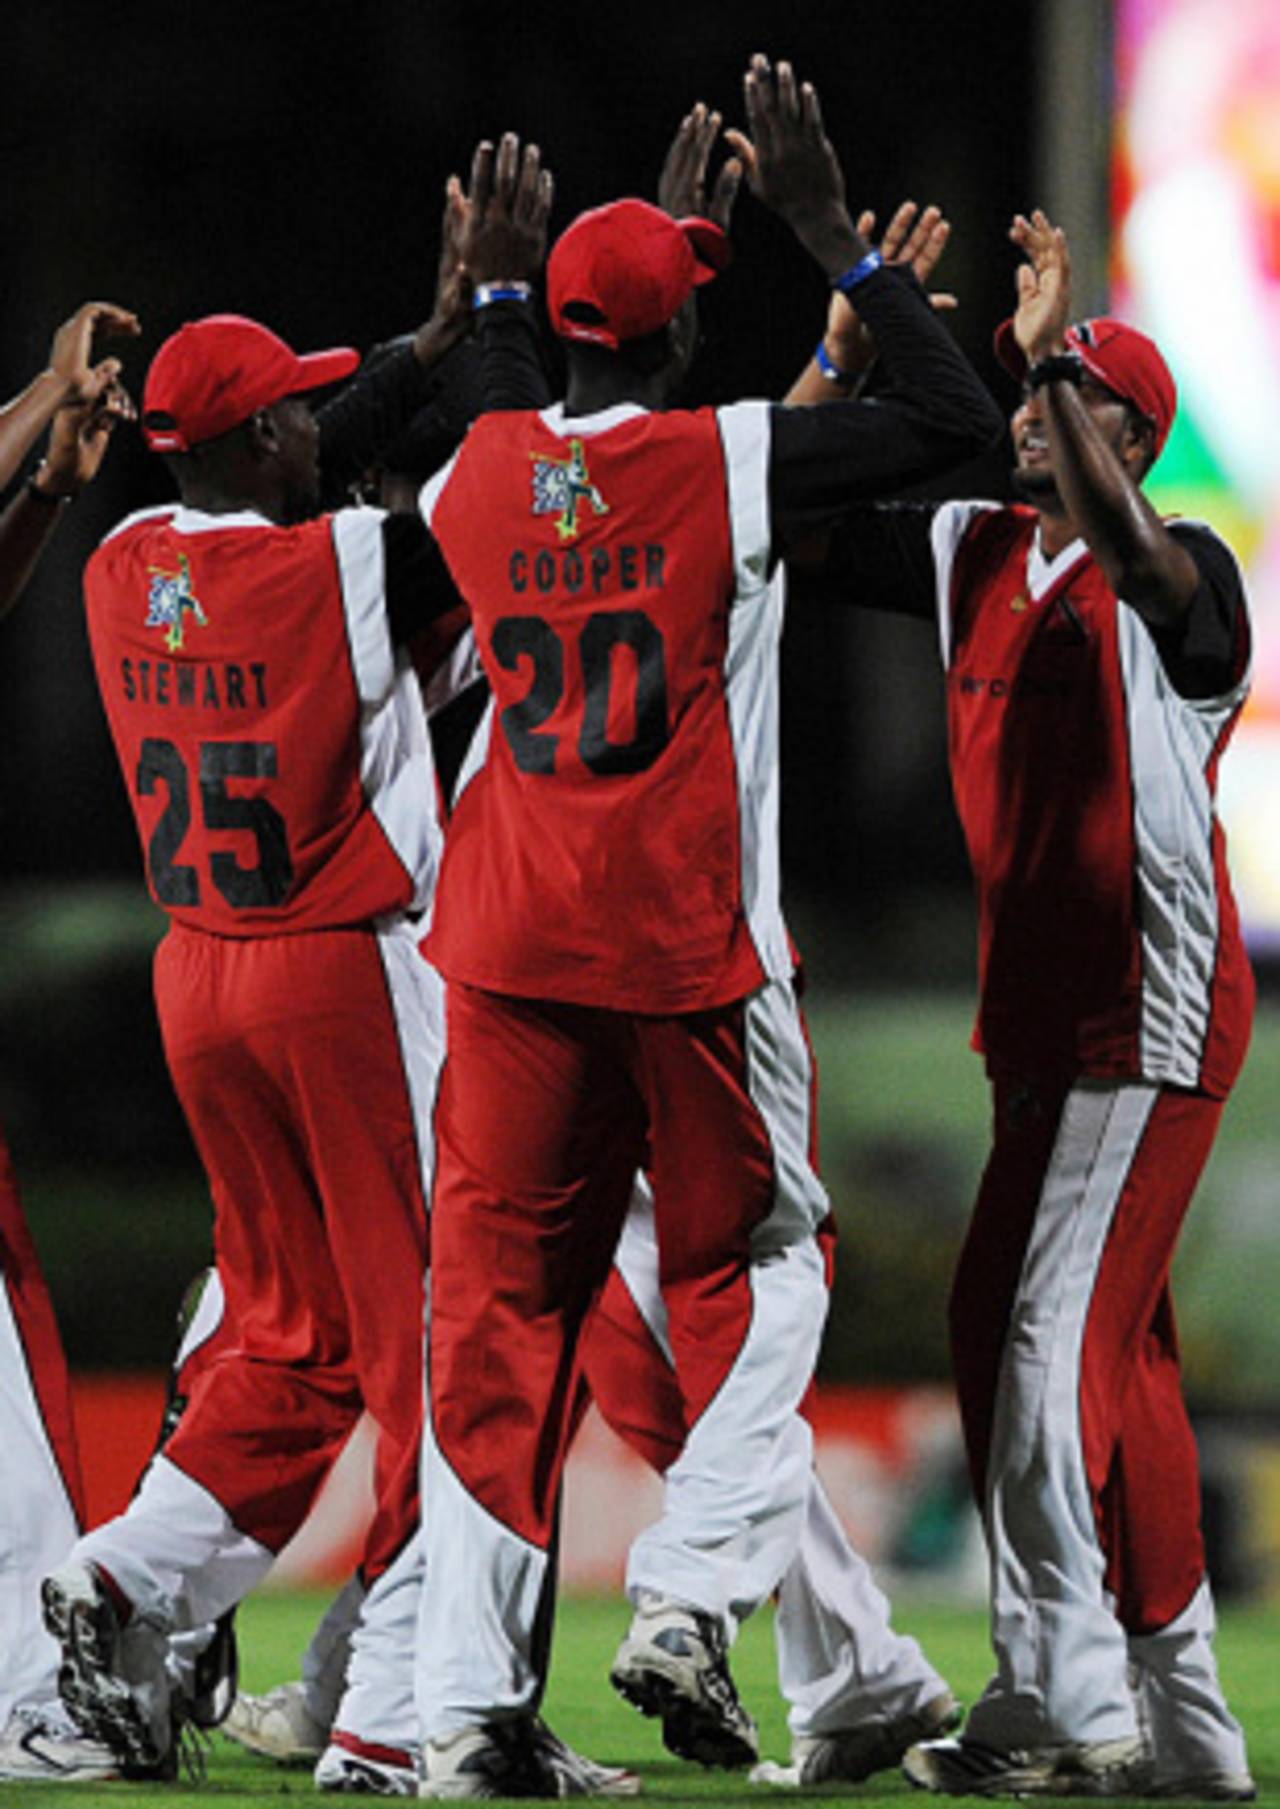 Trinidad's bowlers celebrate two early wickets, Stanford Superstars v Trinidad & Tobago, Antigua, October 25, 2008